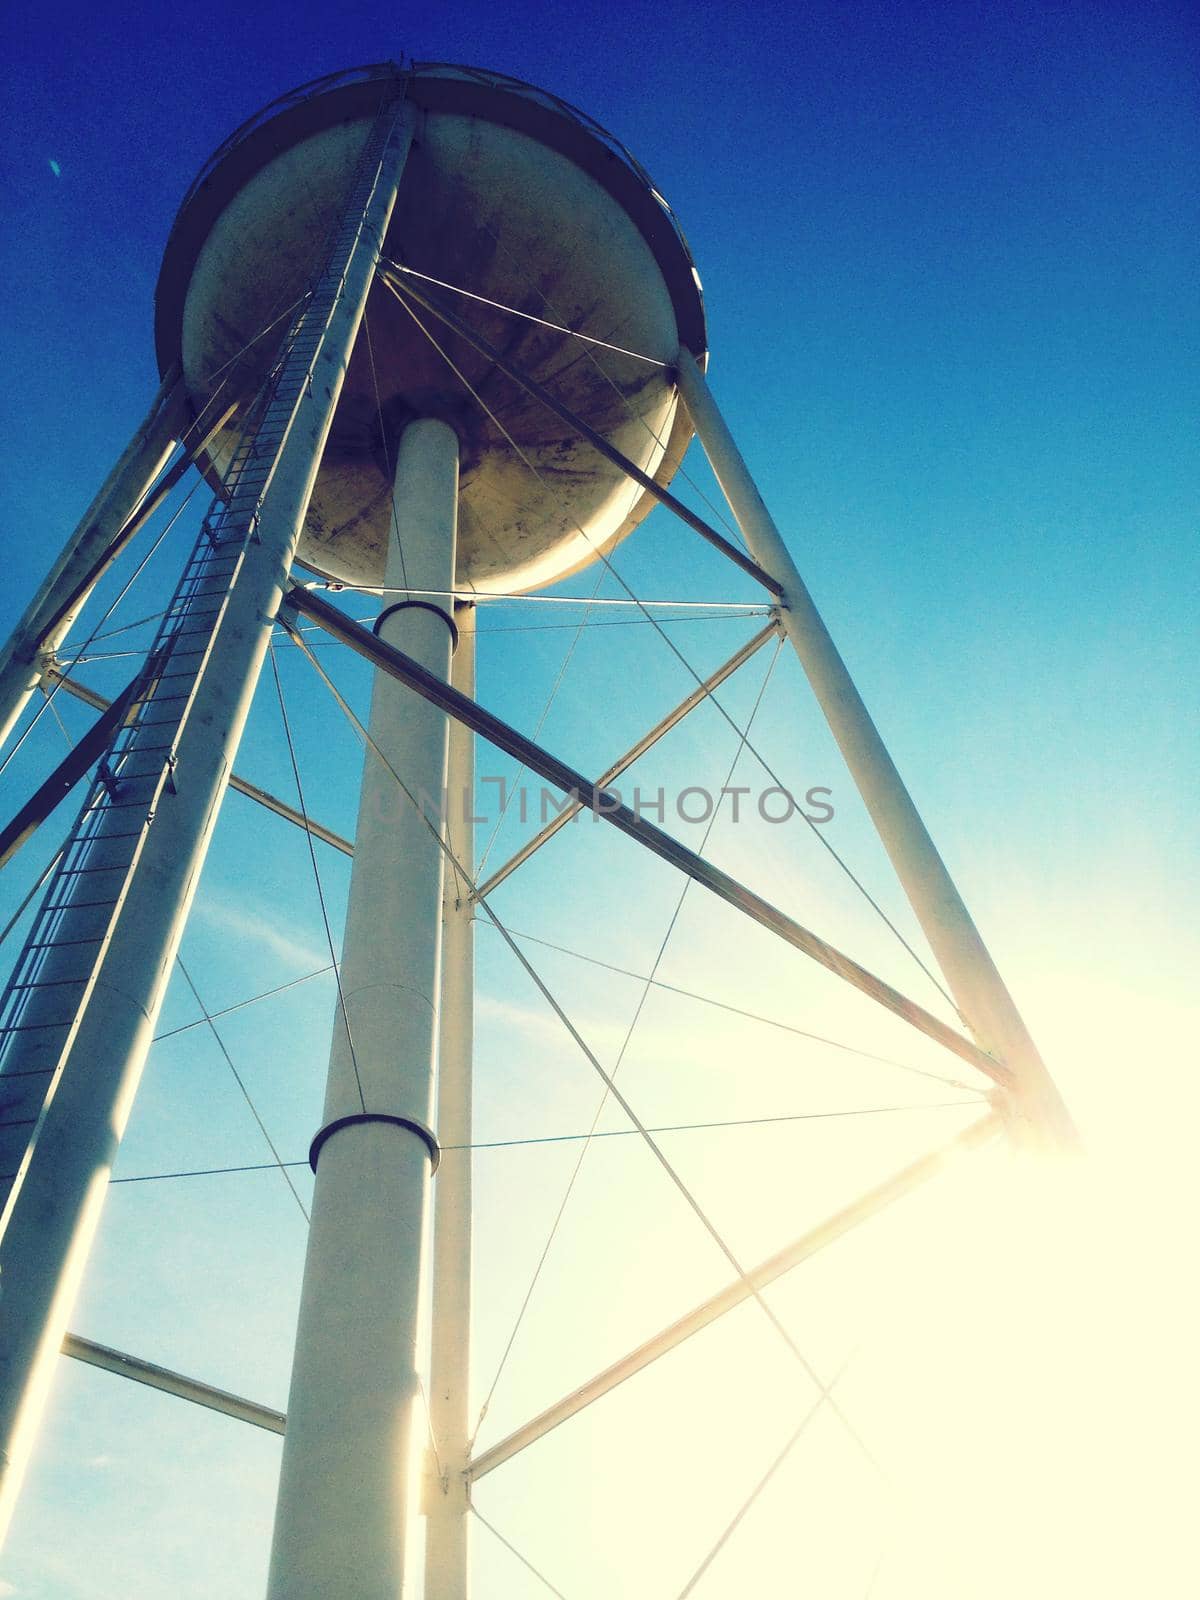 Worm's eye view of a water tower against a blue sky by njproductions